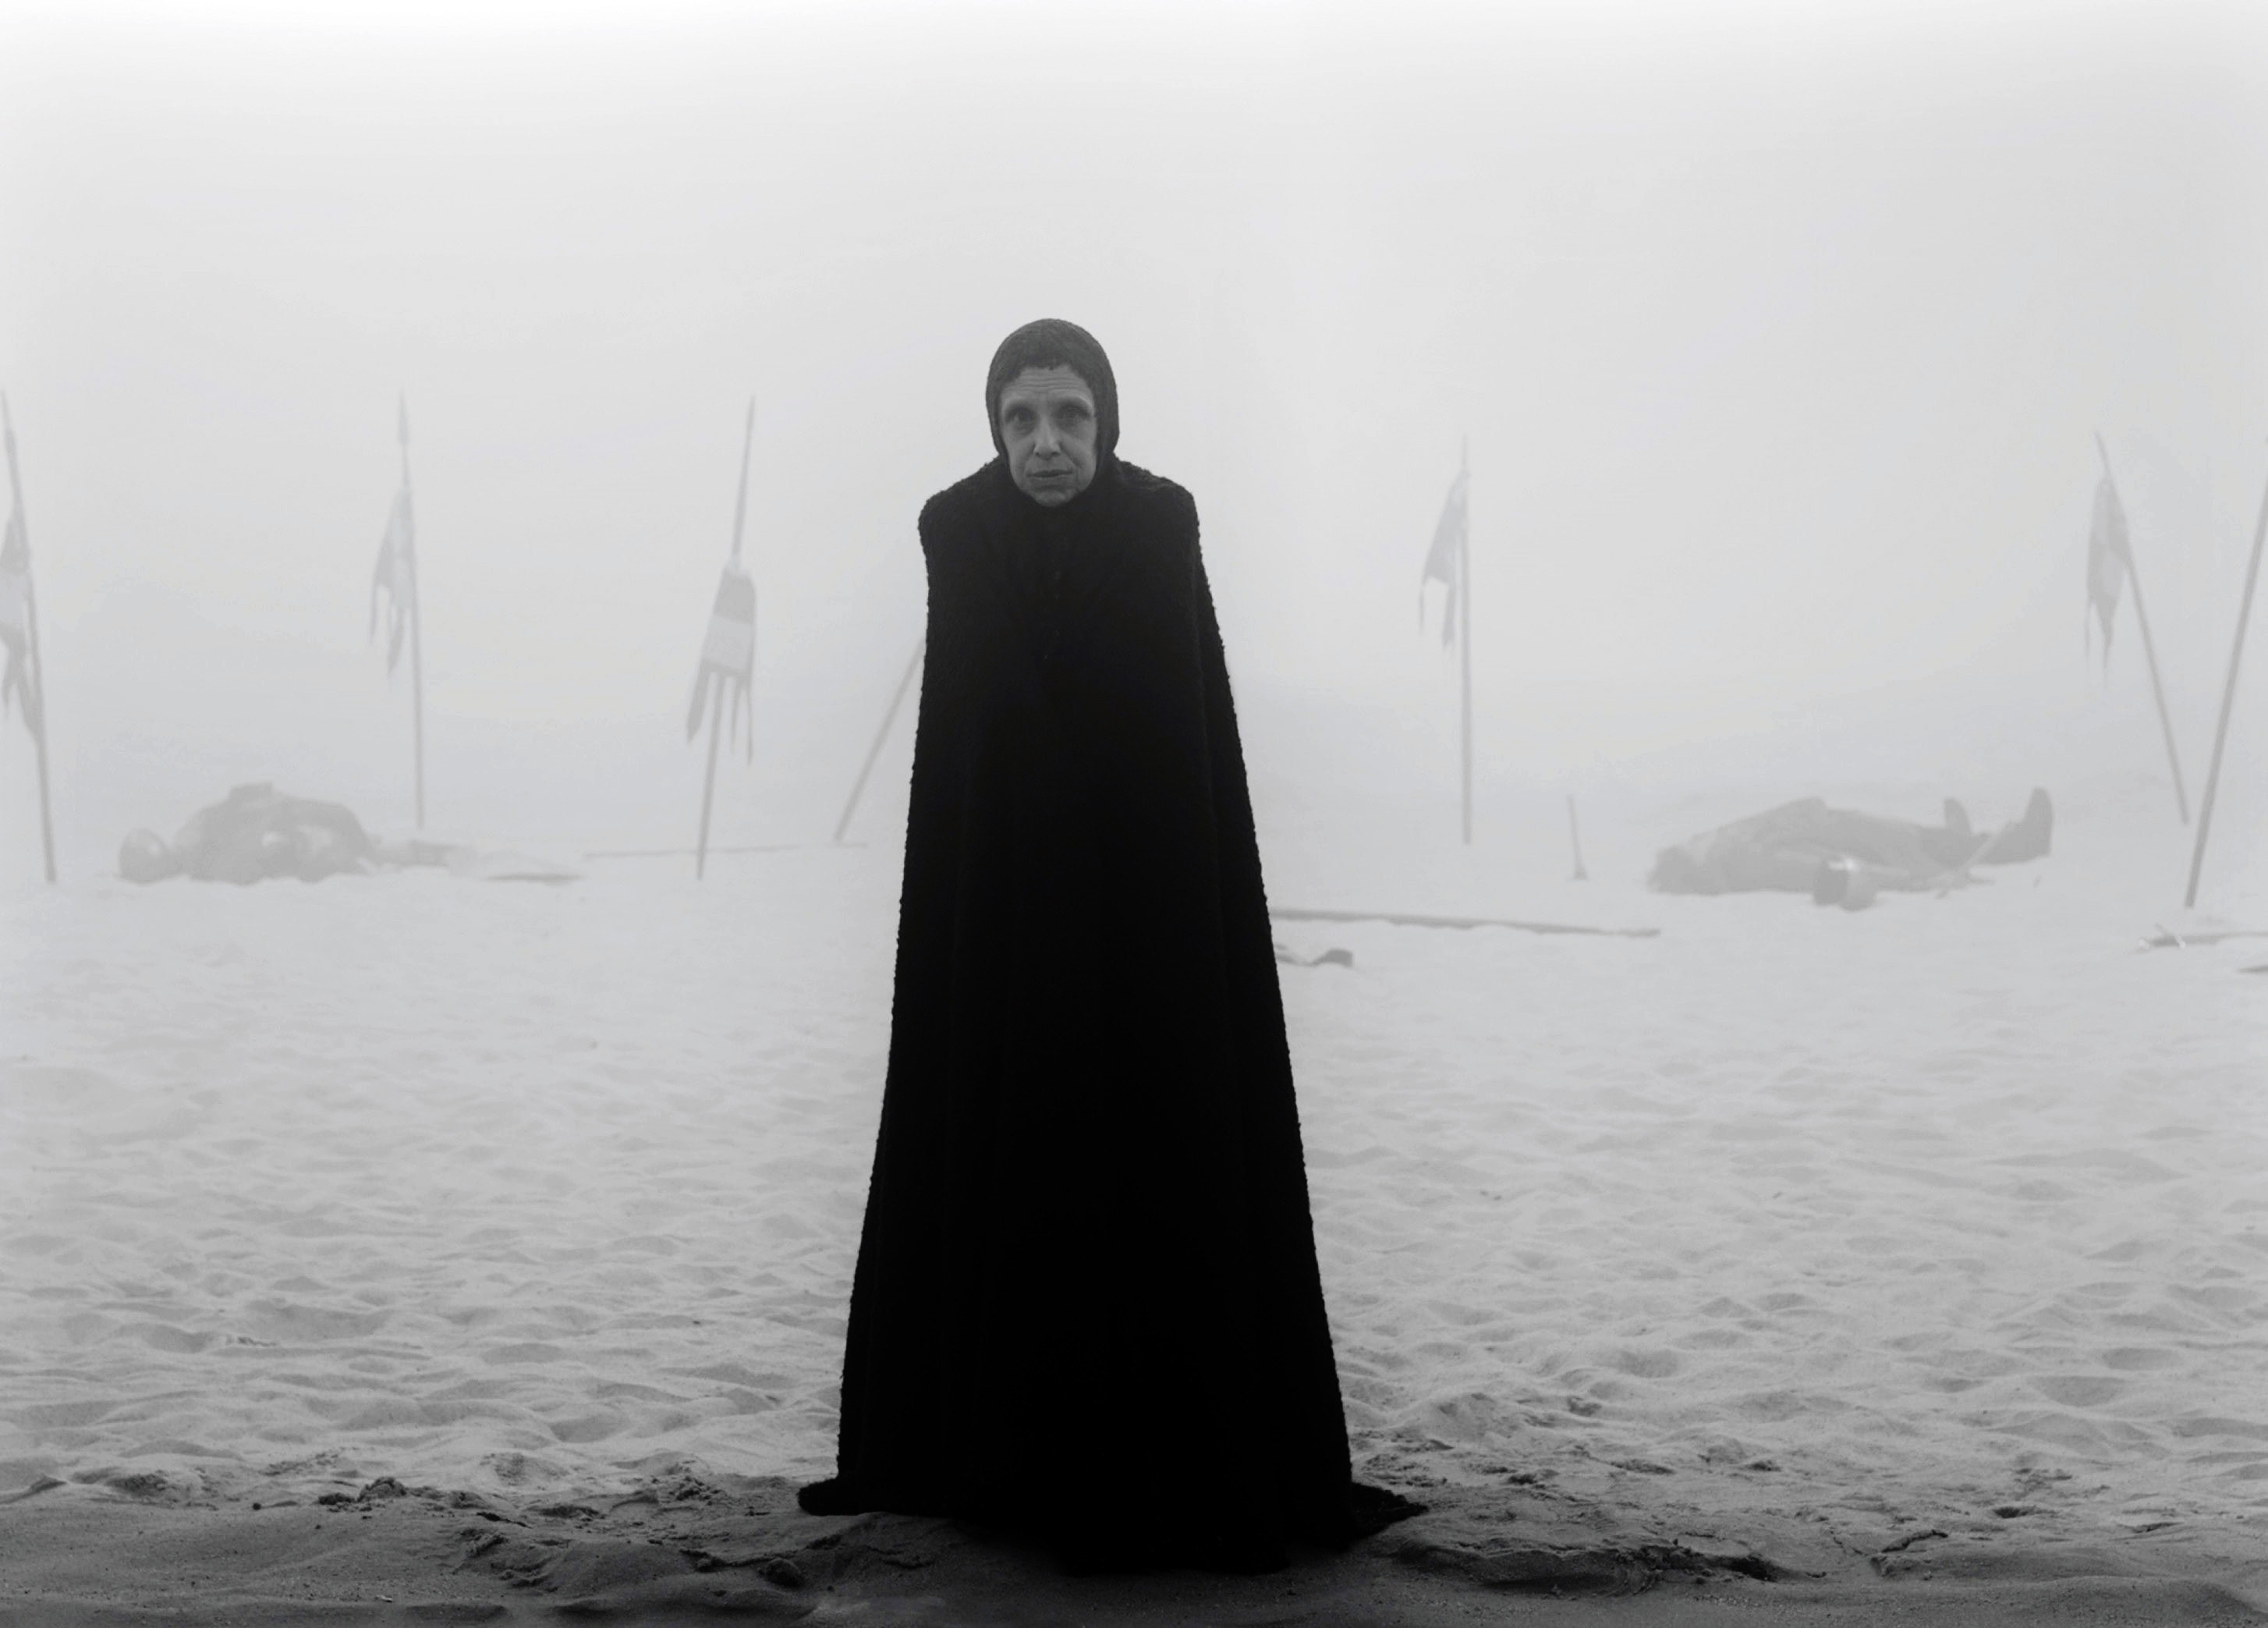 Kathryn Hunter stands on a sandy shore in a cloak